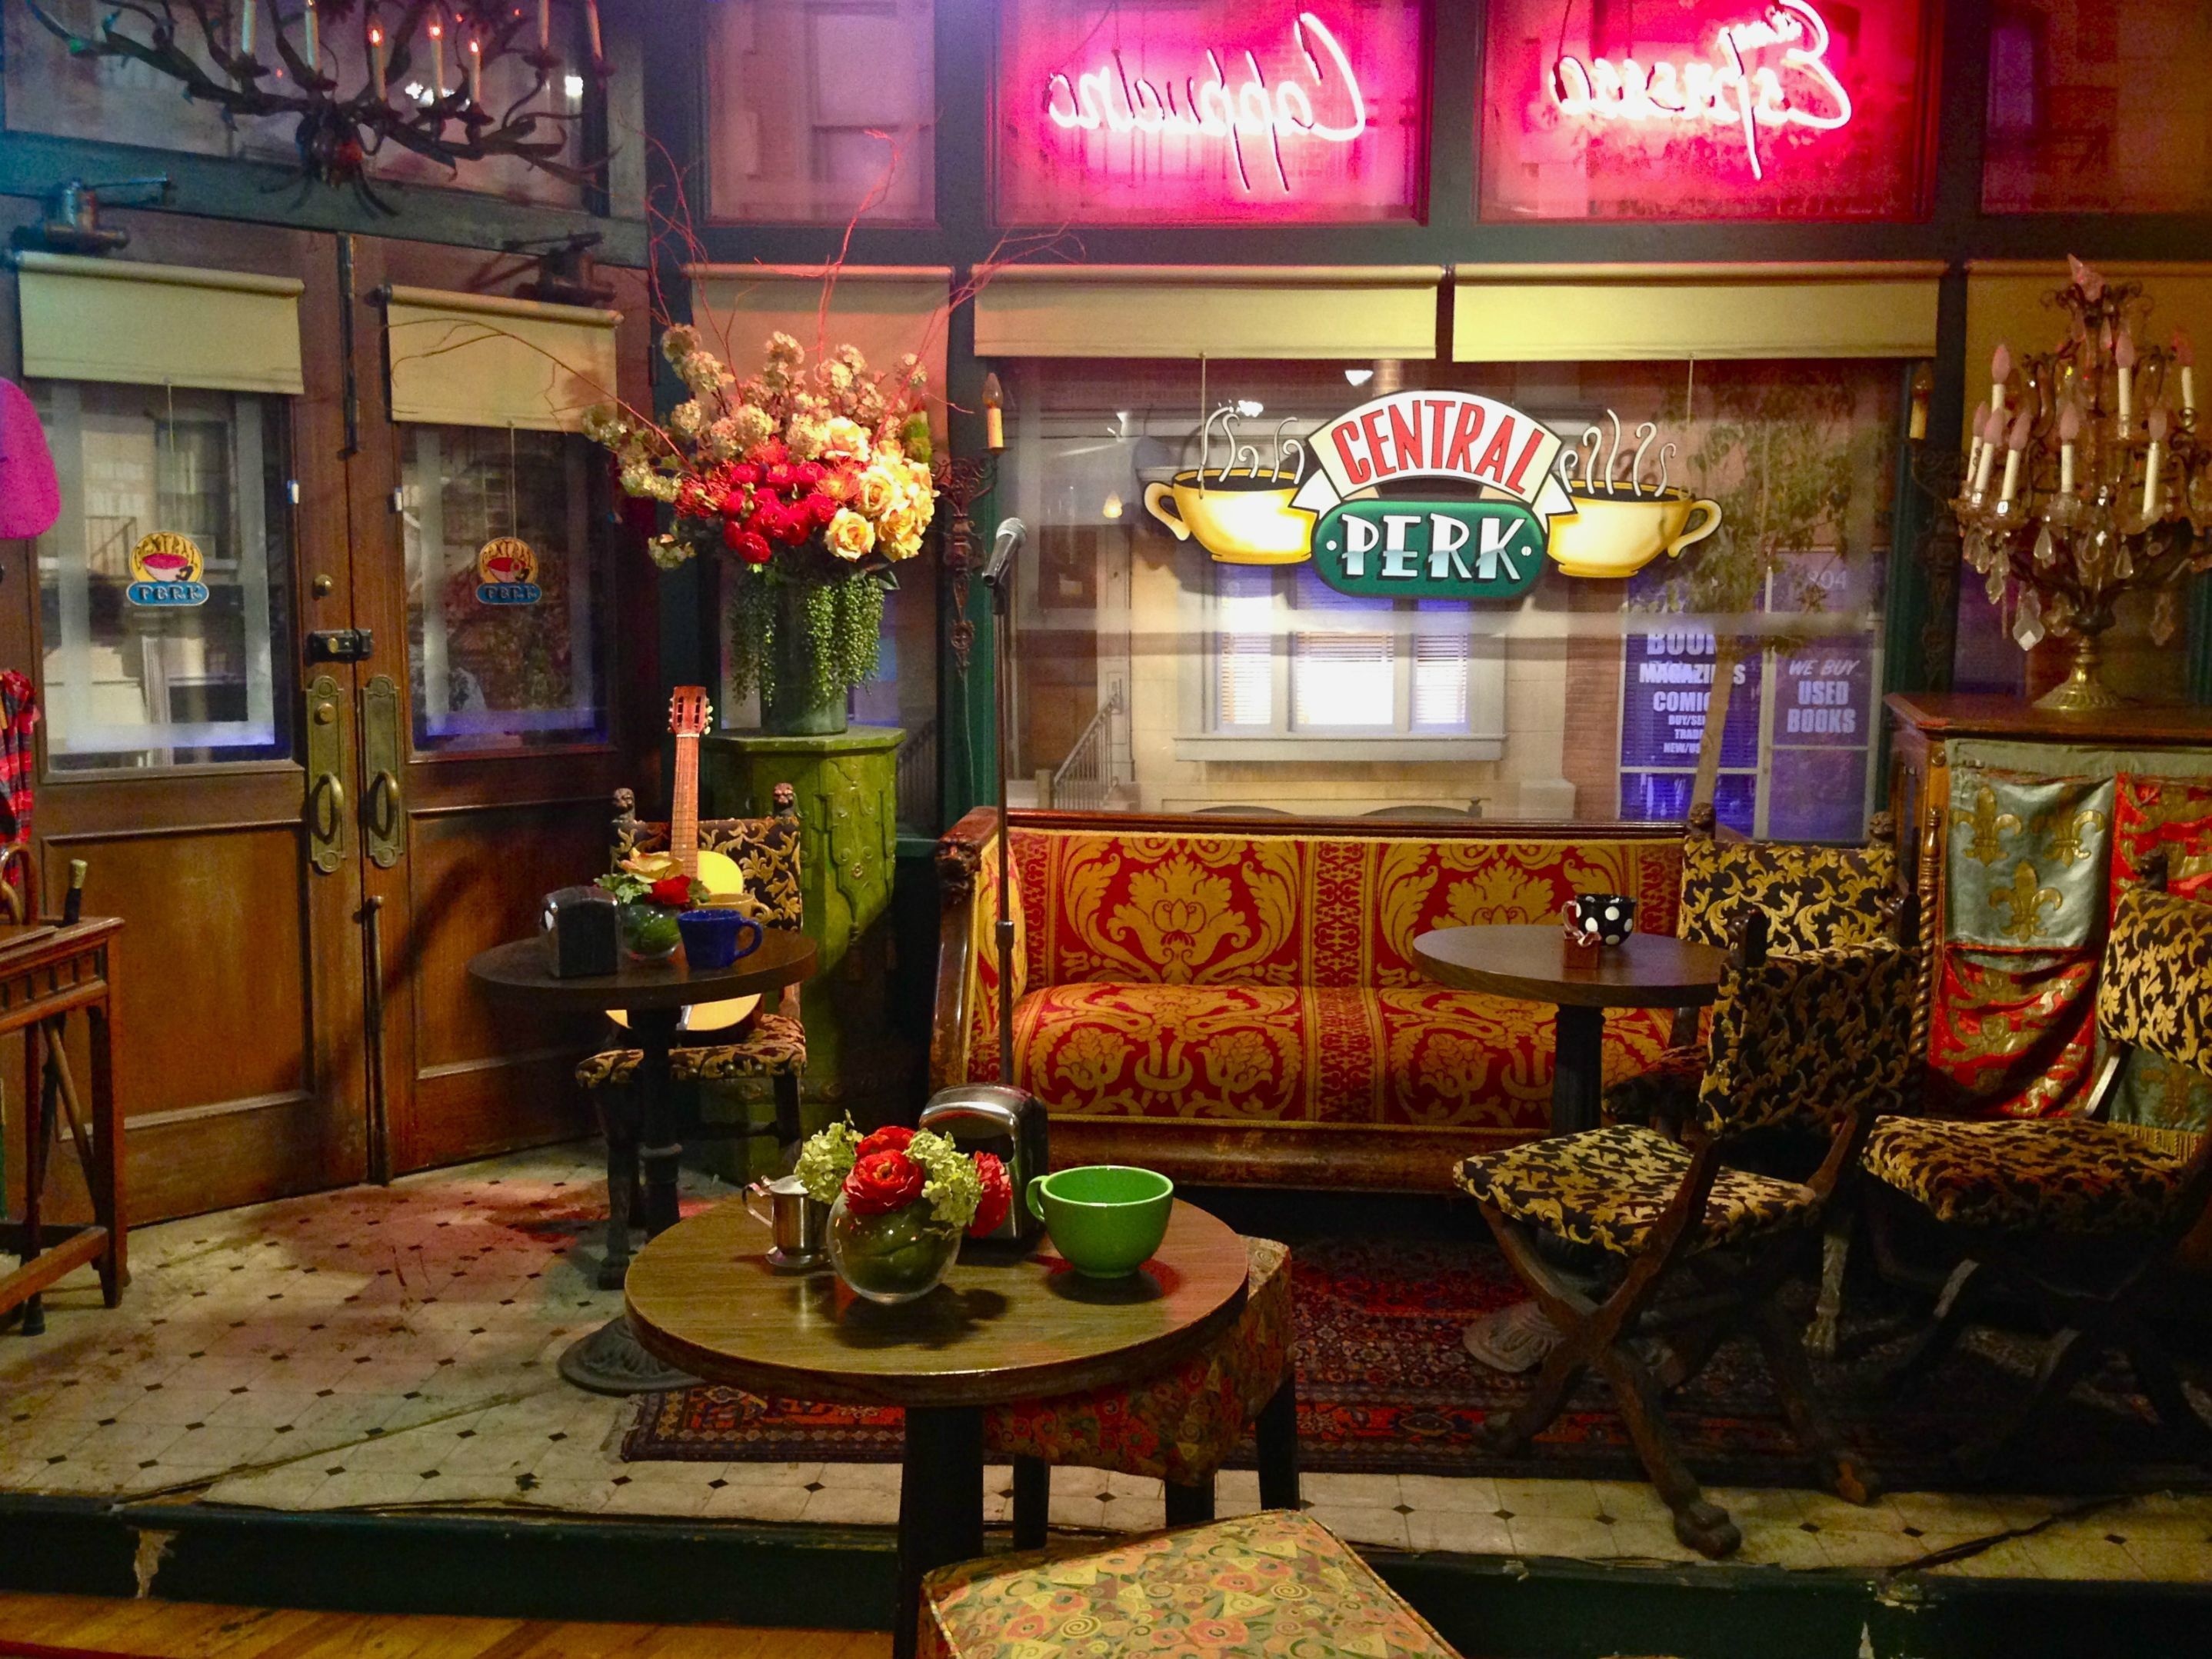 Friends Central Perk, Coffee house nostalgia, TV show vibes, Iconic cafe, 2880x2160 HD Desktop